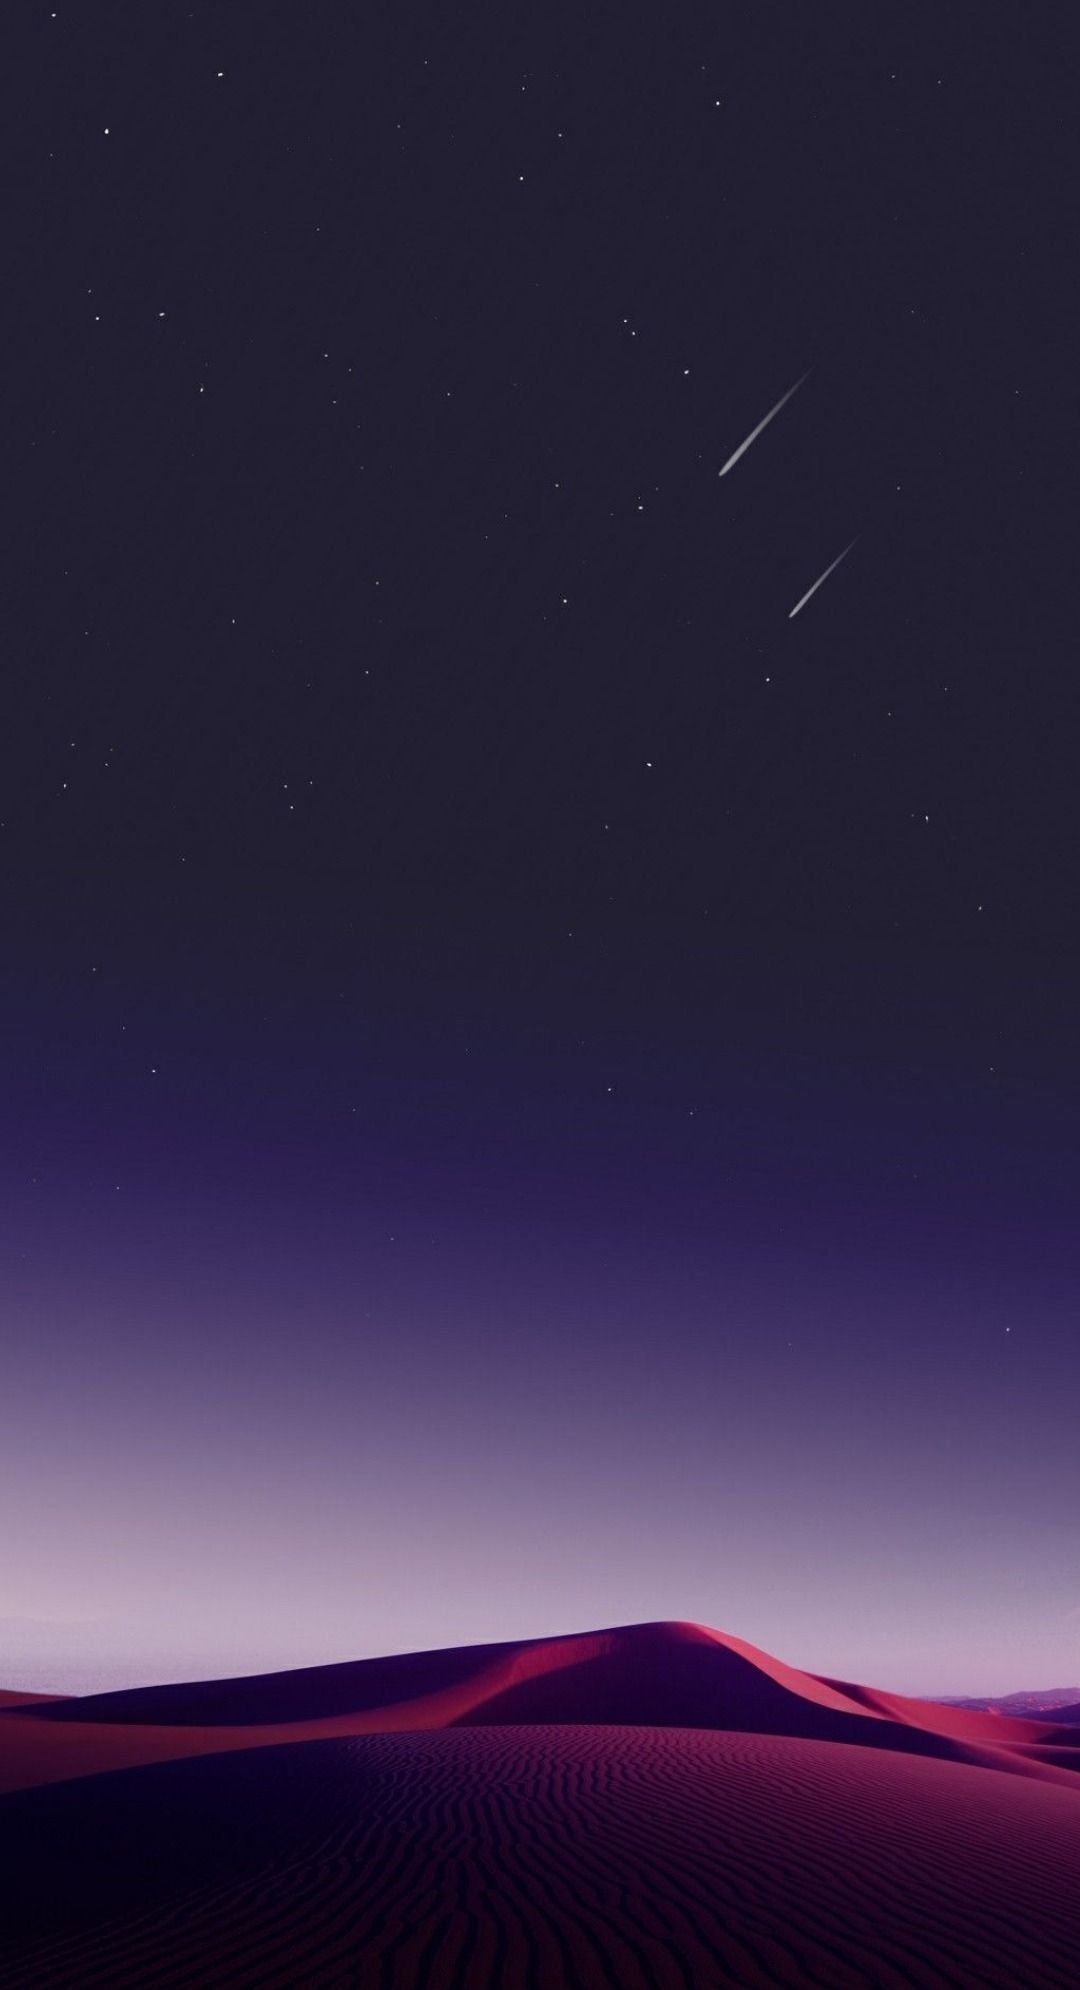 IPhone wallpaper with a desert at night with shooting stars. - Desert